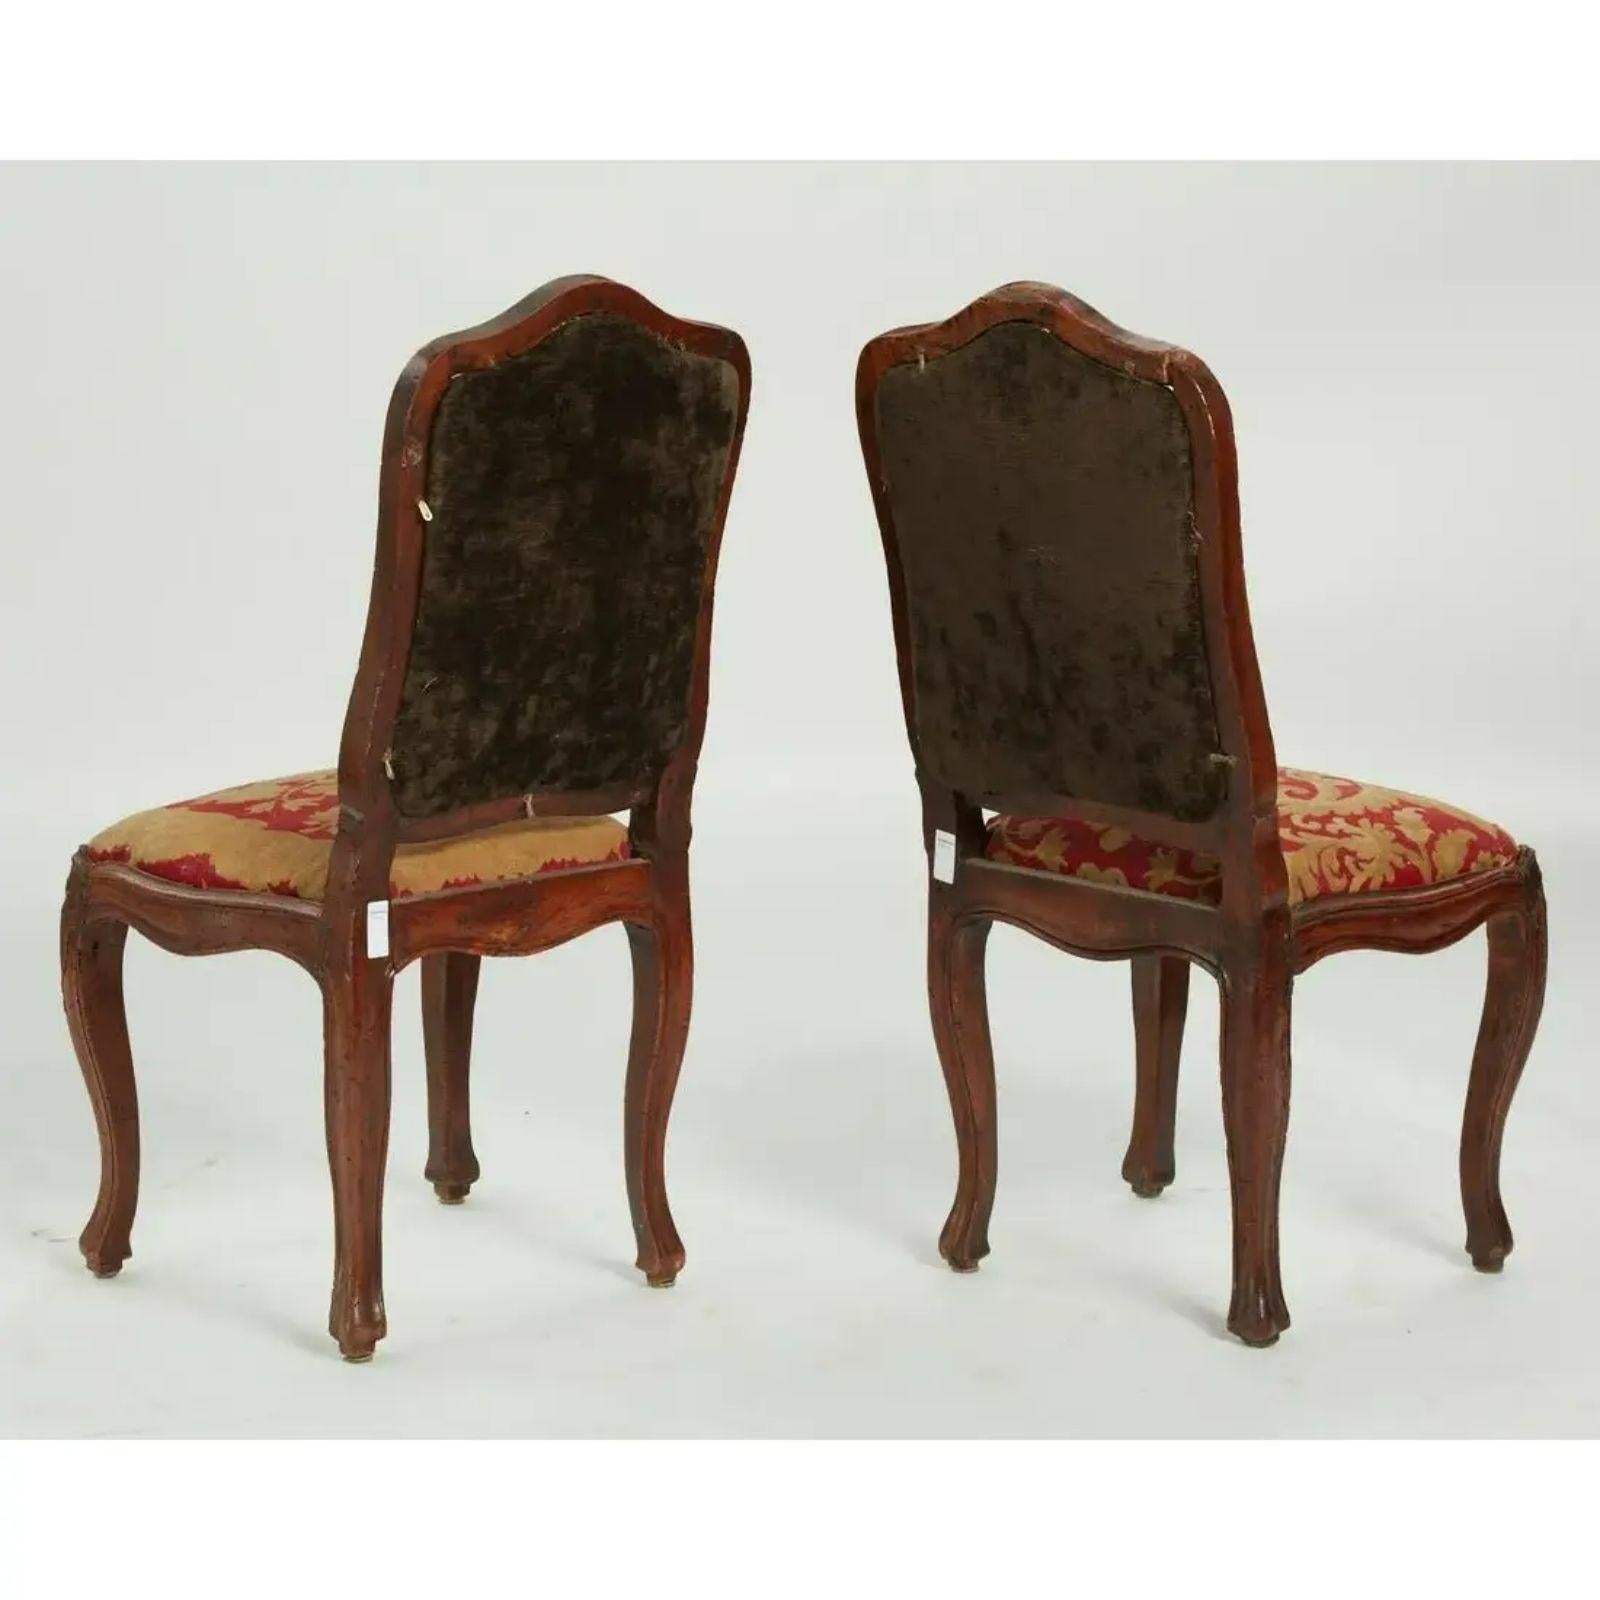 Antique 18th century Italian walnut Rococo side chairs

Additional information: 
Materials: walnut
Color: red
Period: 18th century
Styles: Italian, Rococo
Number of seats: 2
Item type: vintage, antique or pre-owned
Dimensions: 20